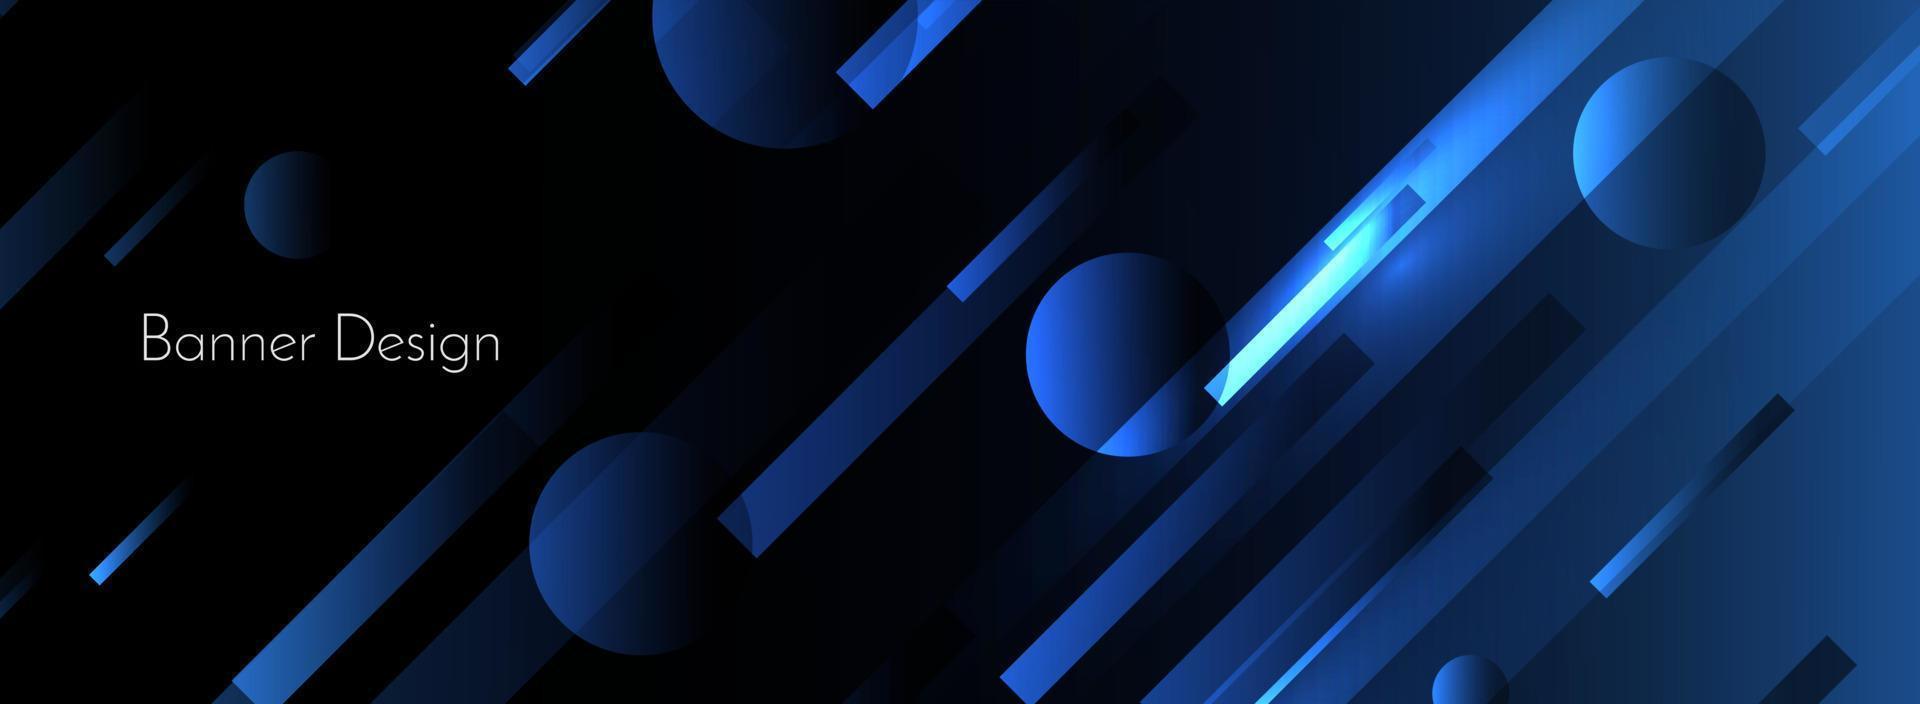 Abstract geometric blue dynamic elegant modern shape pattern colorful background vector